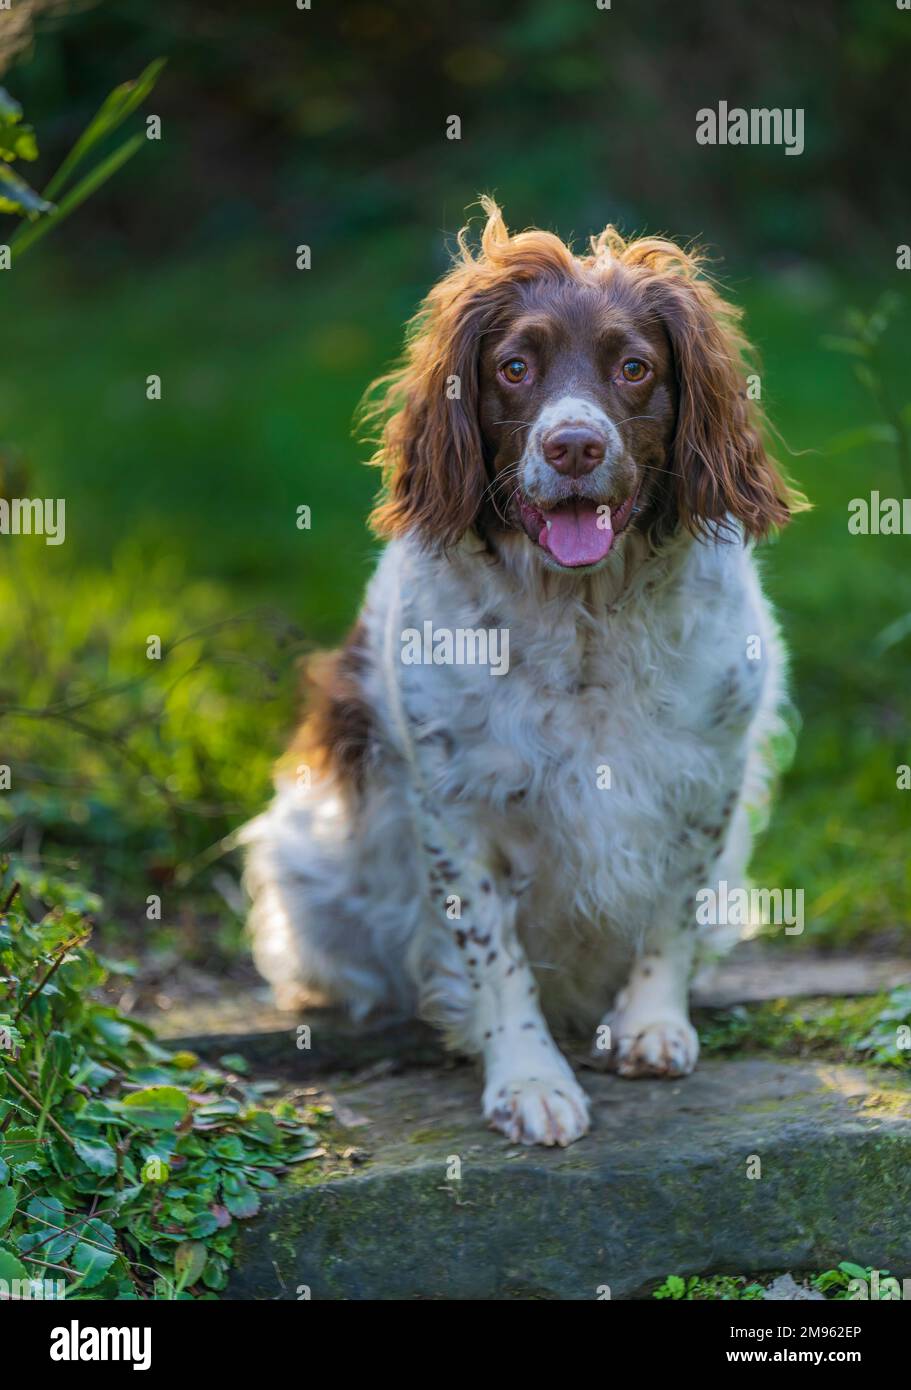 An English Springer Spaniel dog sitting at the top of garden steps Stock Photo